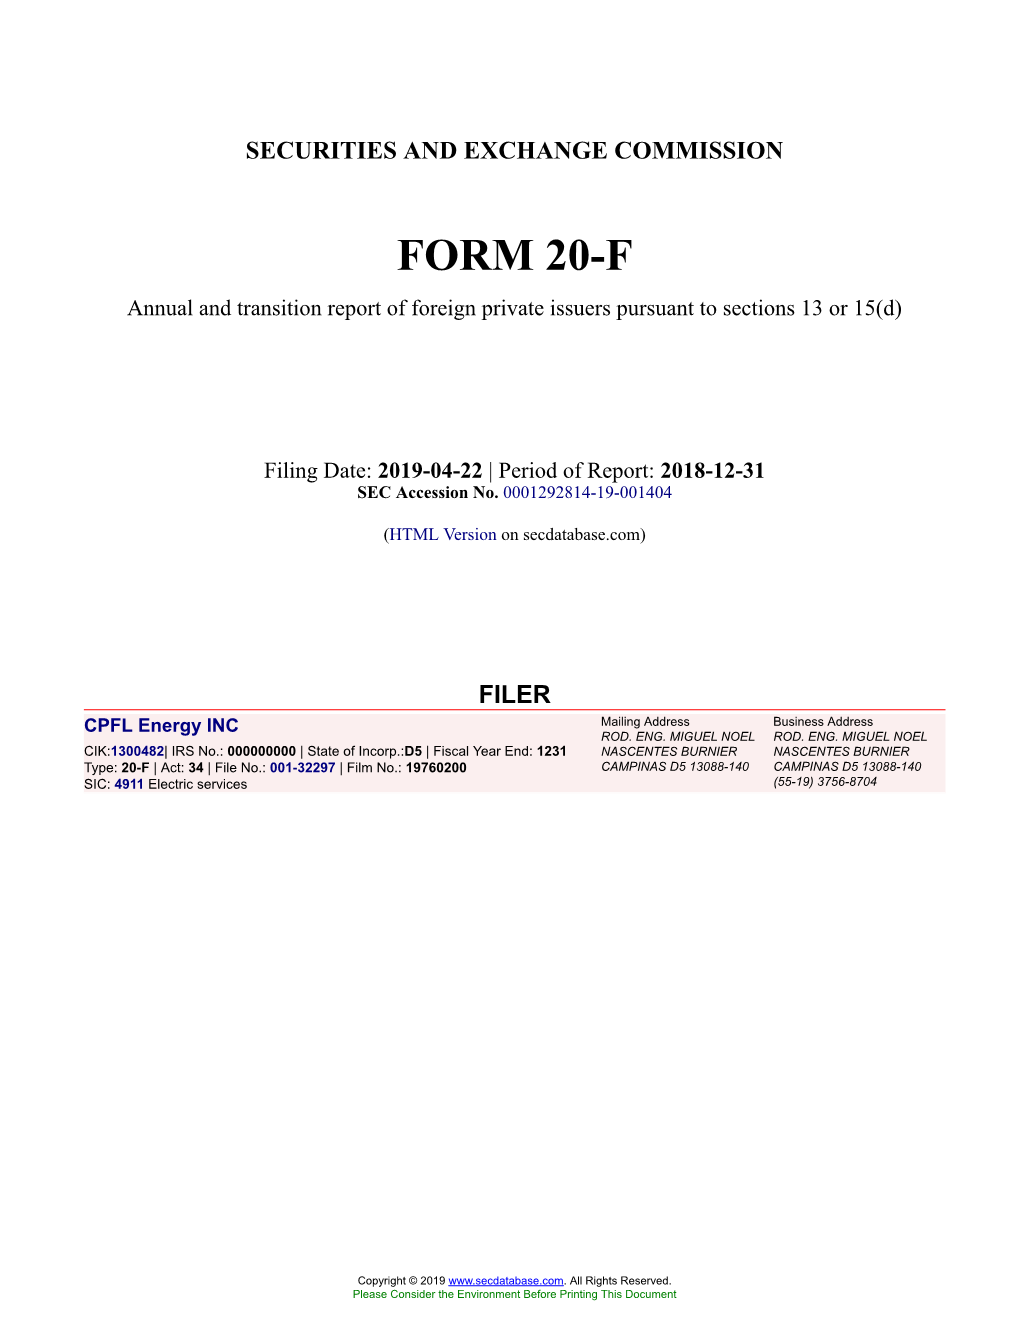 CPFL Energy INC Form 20-F Filed 2019-04-22